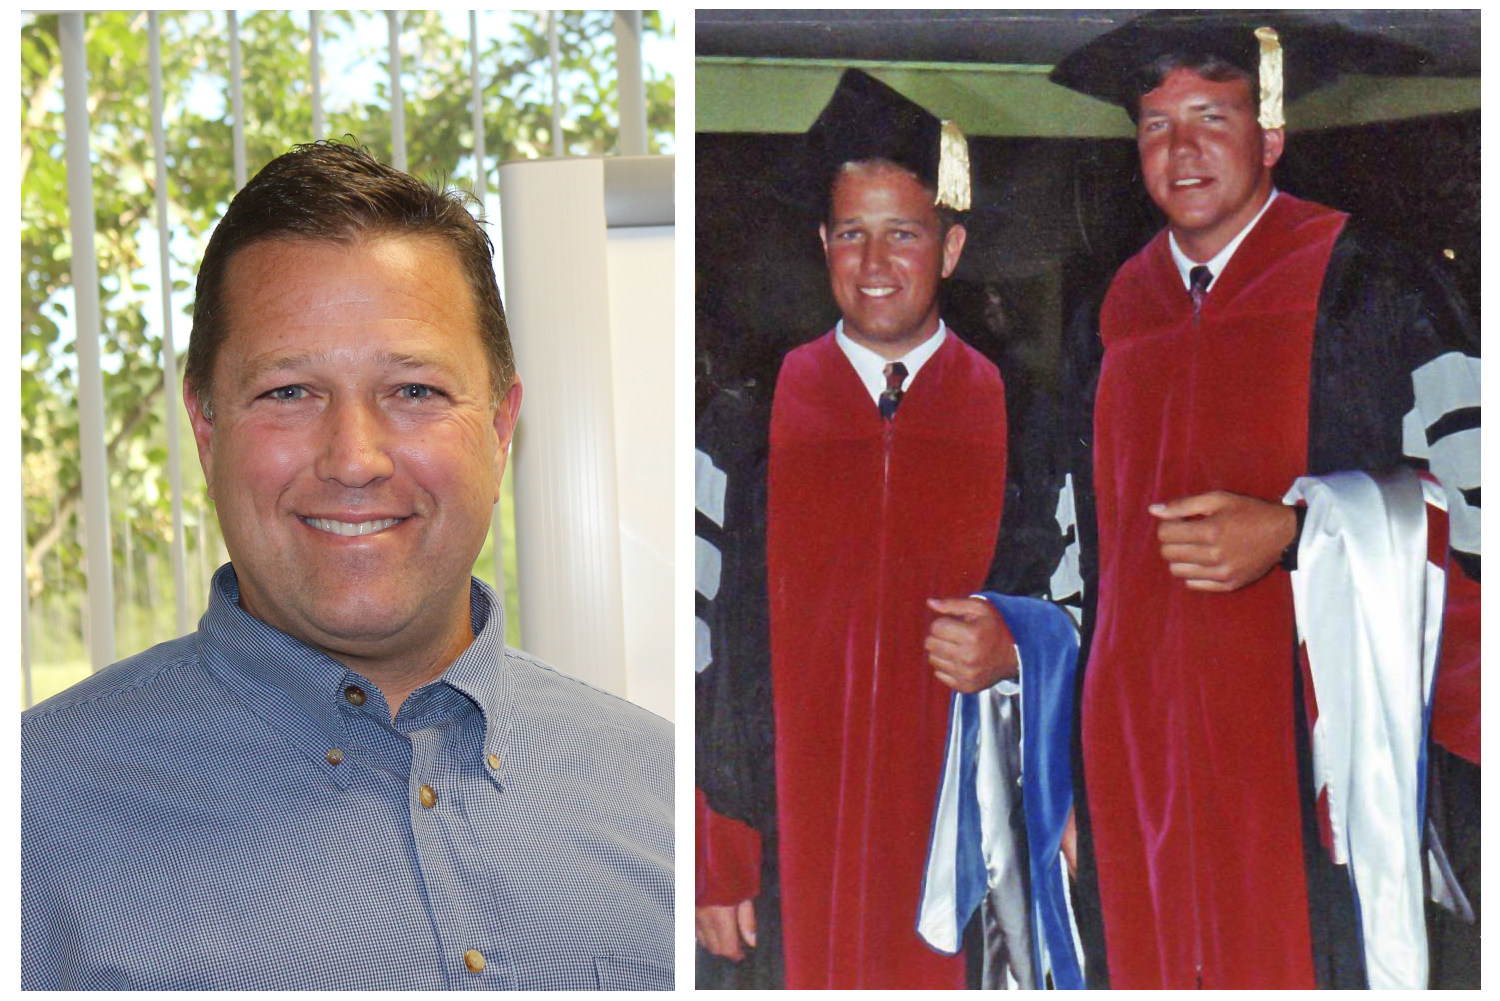 Dr. Todd R. Henderson, left, president and CEO of Nutramax Laboratories, is honoring his late friend and classmate Dr. Paul W. Farmer, shown at right with Henderson at their MSU-CVM graduation.